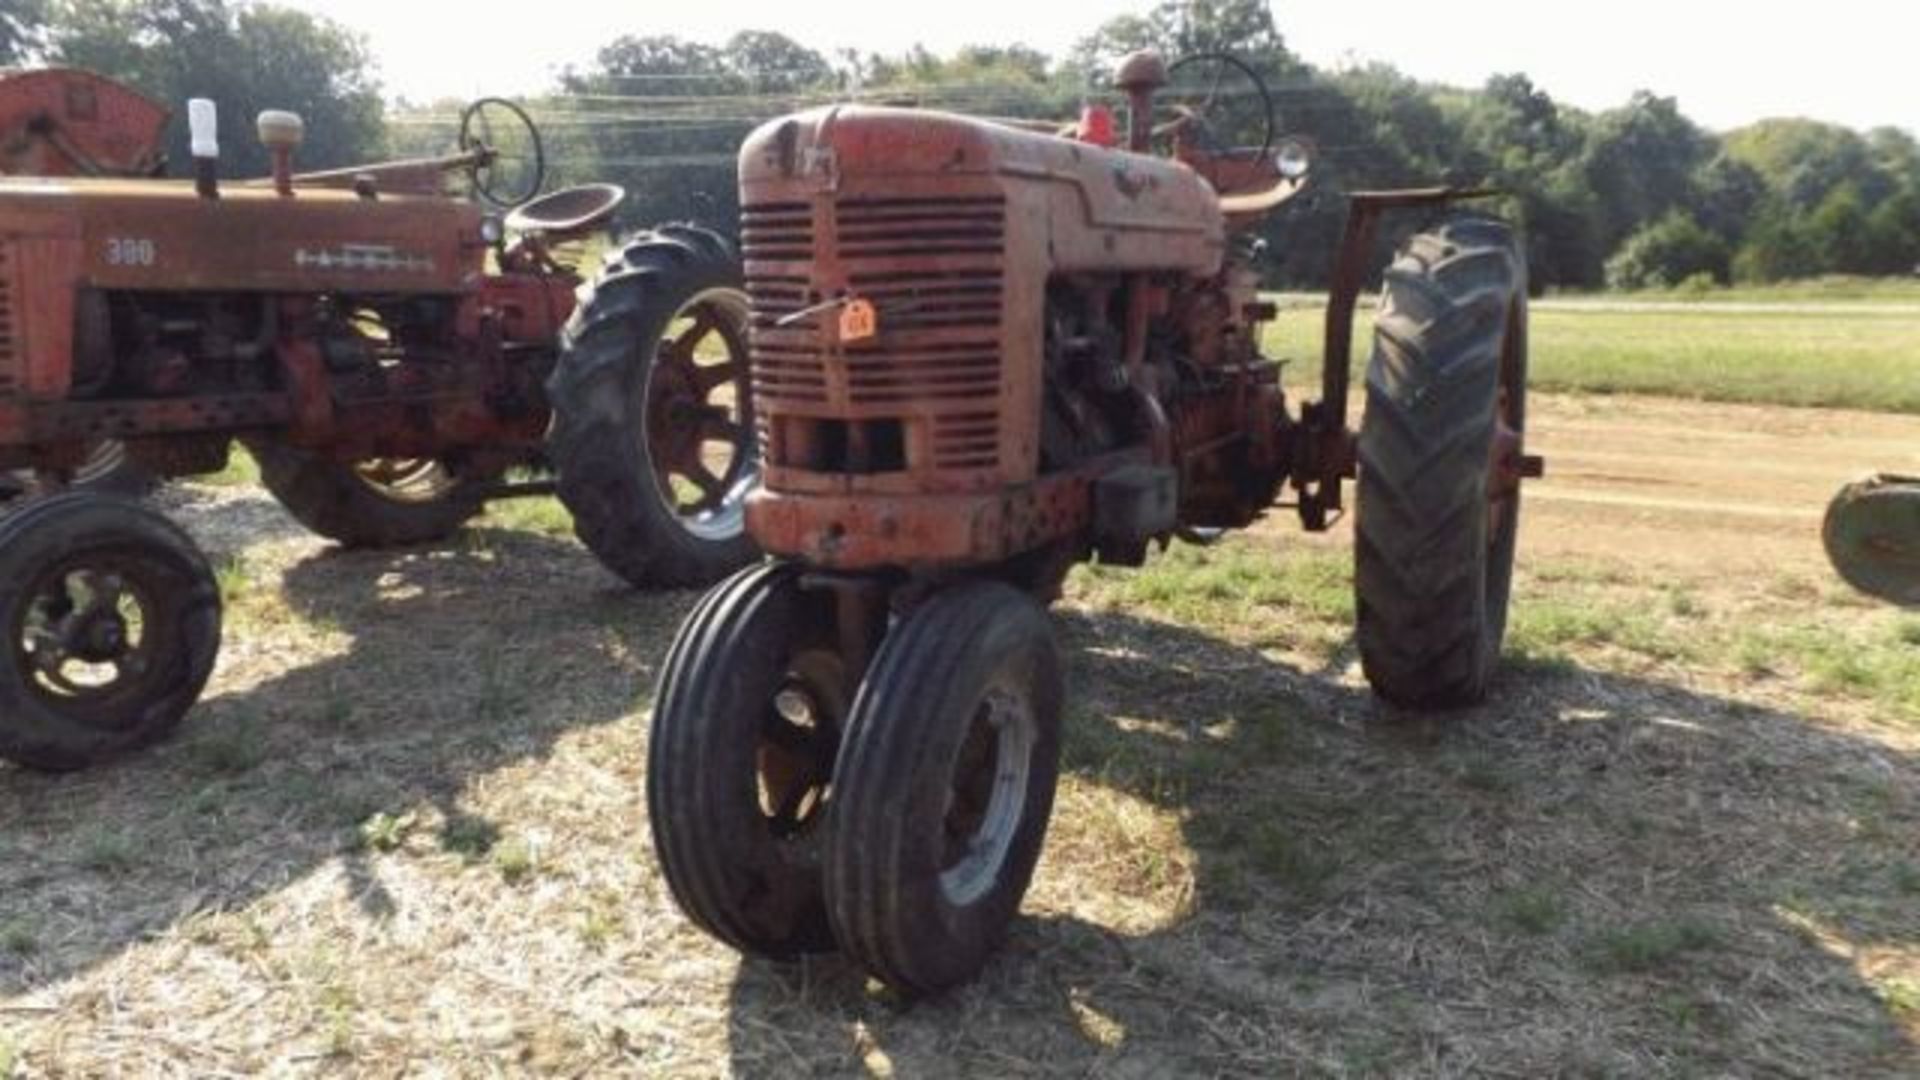 Lot 414 Farmall Super M Louisville Tractor, 1953 NF, PS, Rear Weights, Complete, Runs